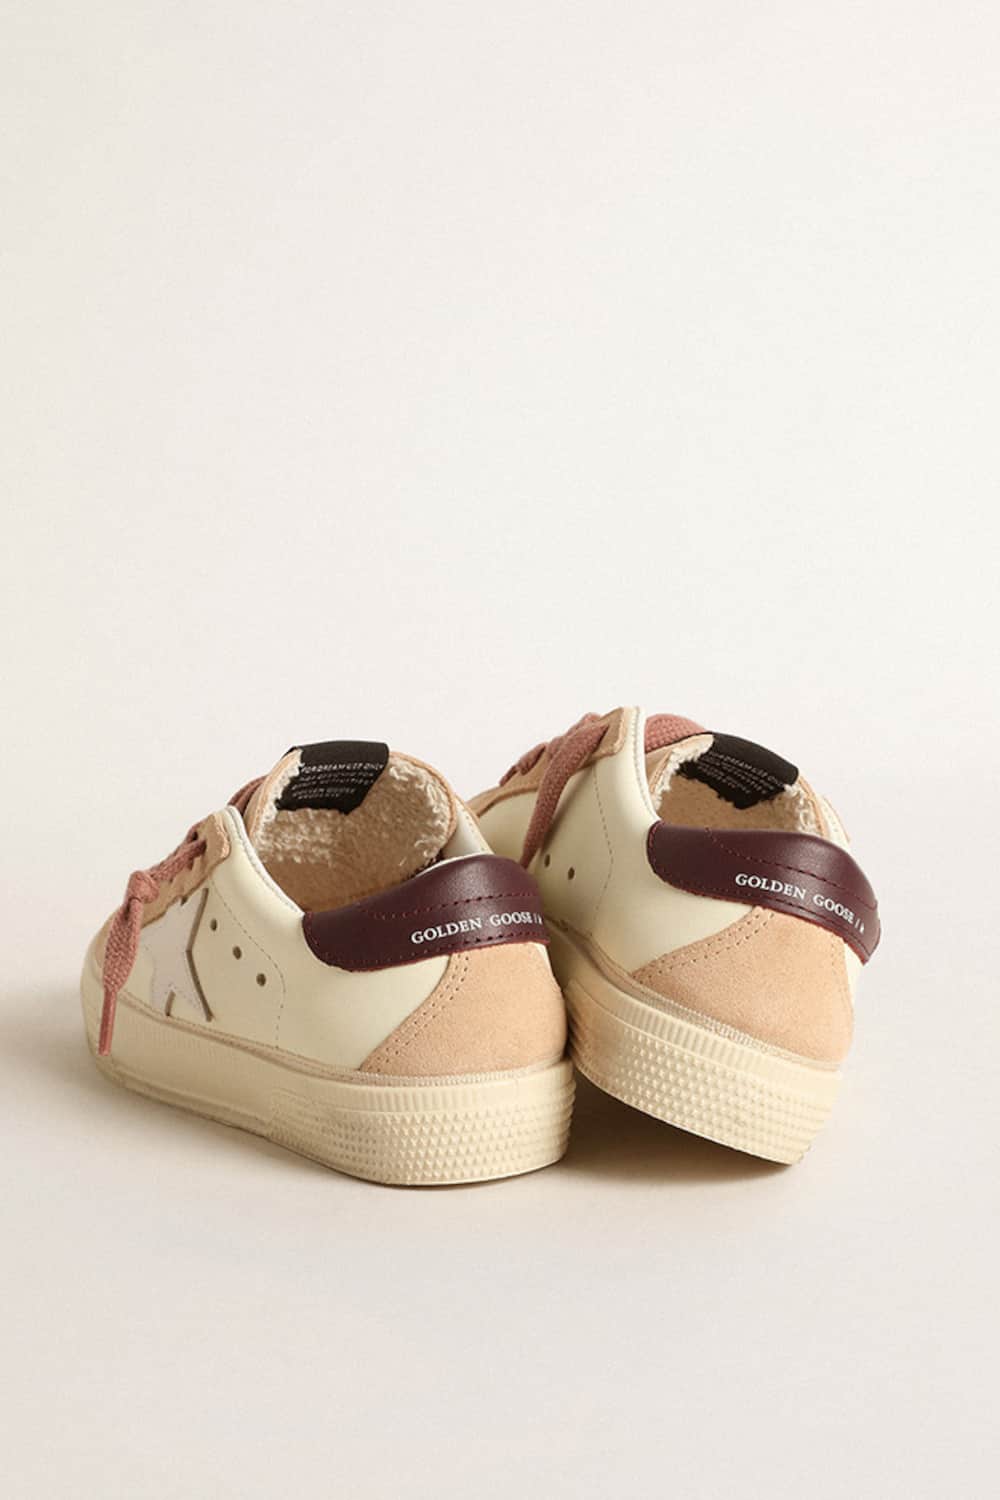 Golden Goose - Young May in cream leather with suede star and heel tab in 